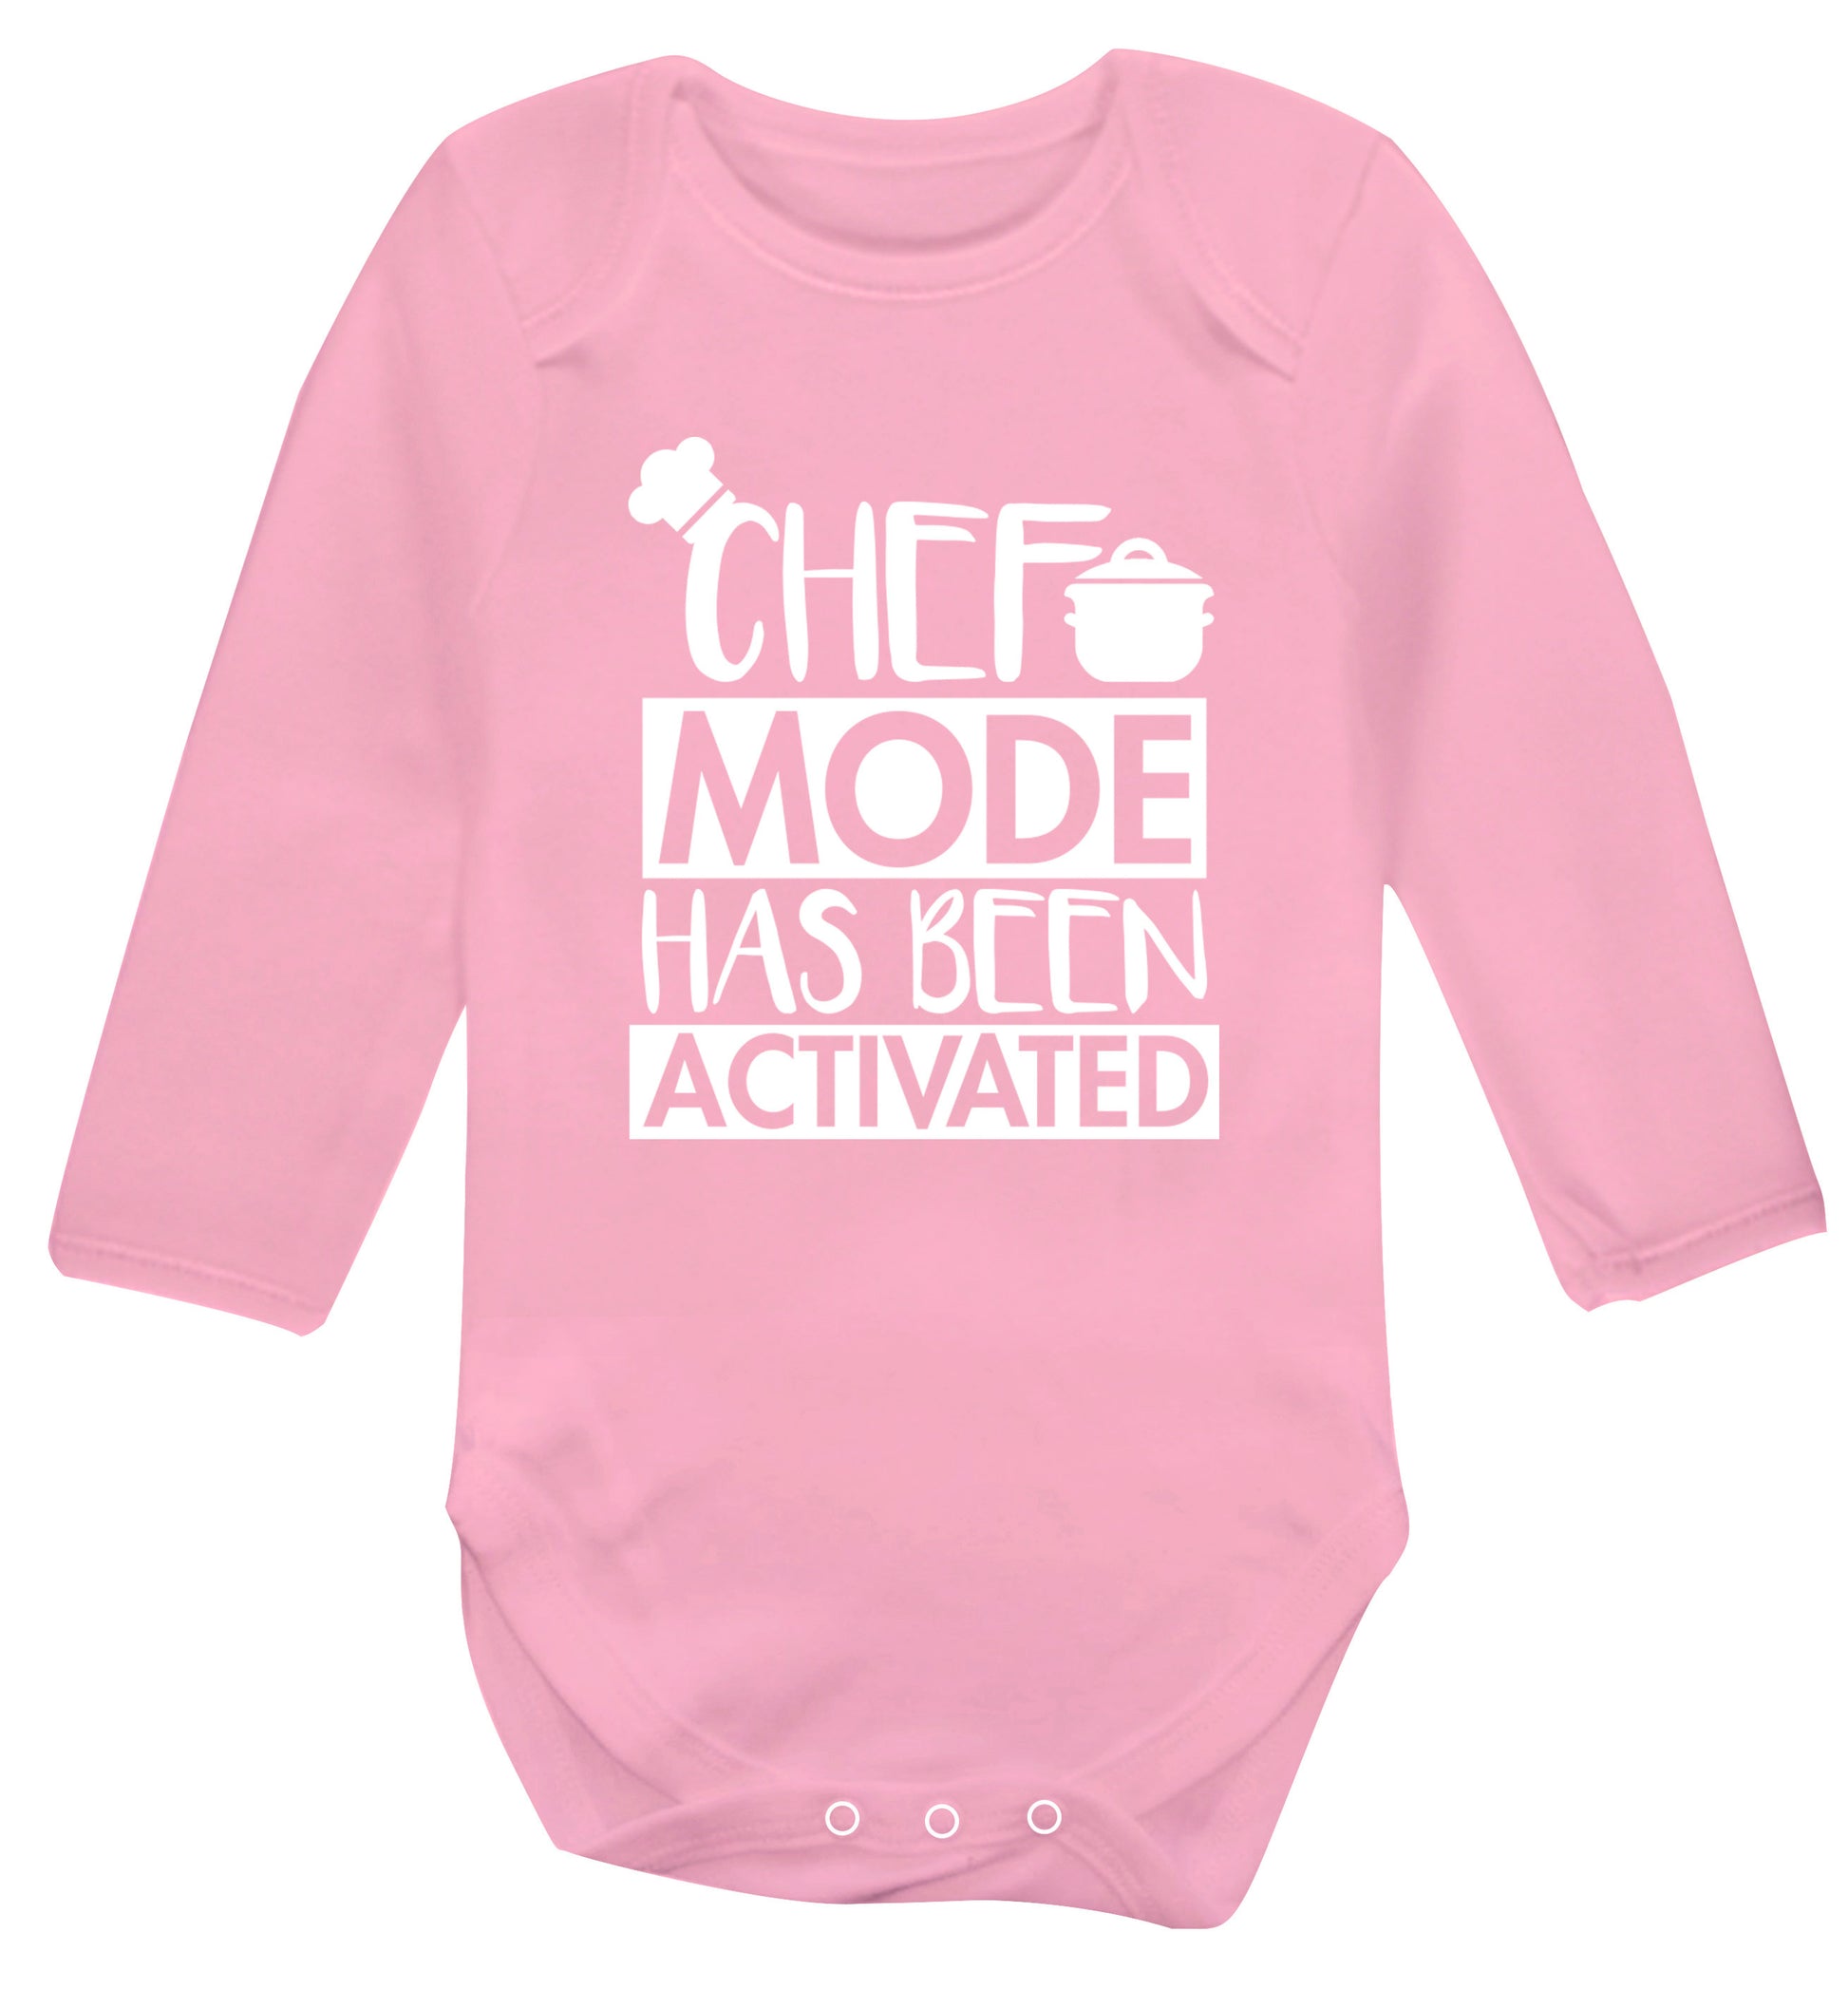 Chef mode has been activated Baby Vest long sleeved pale pink 6-12 months